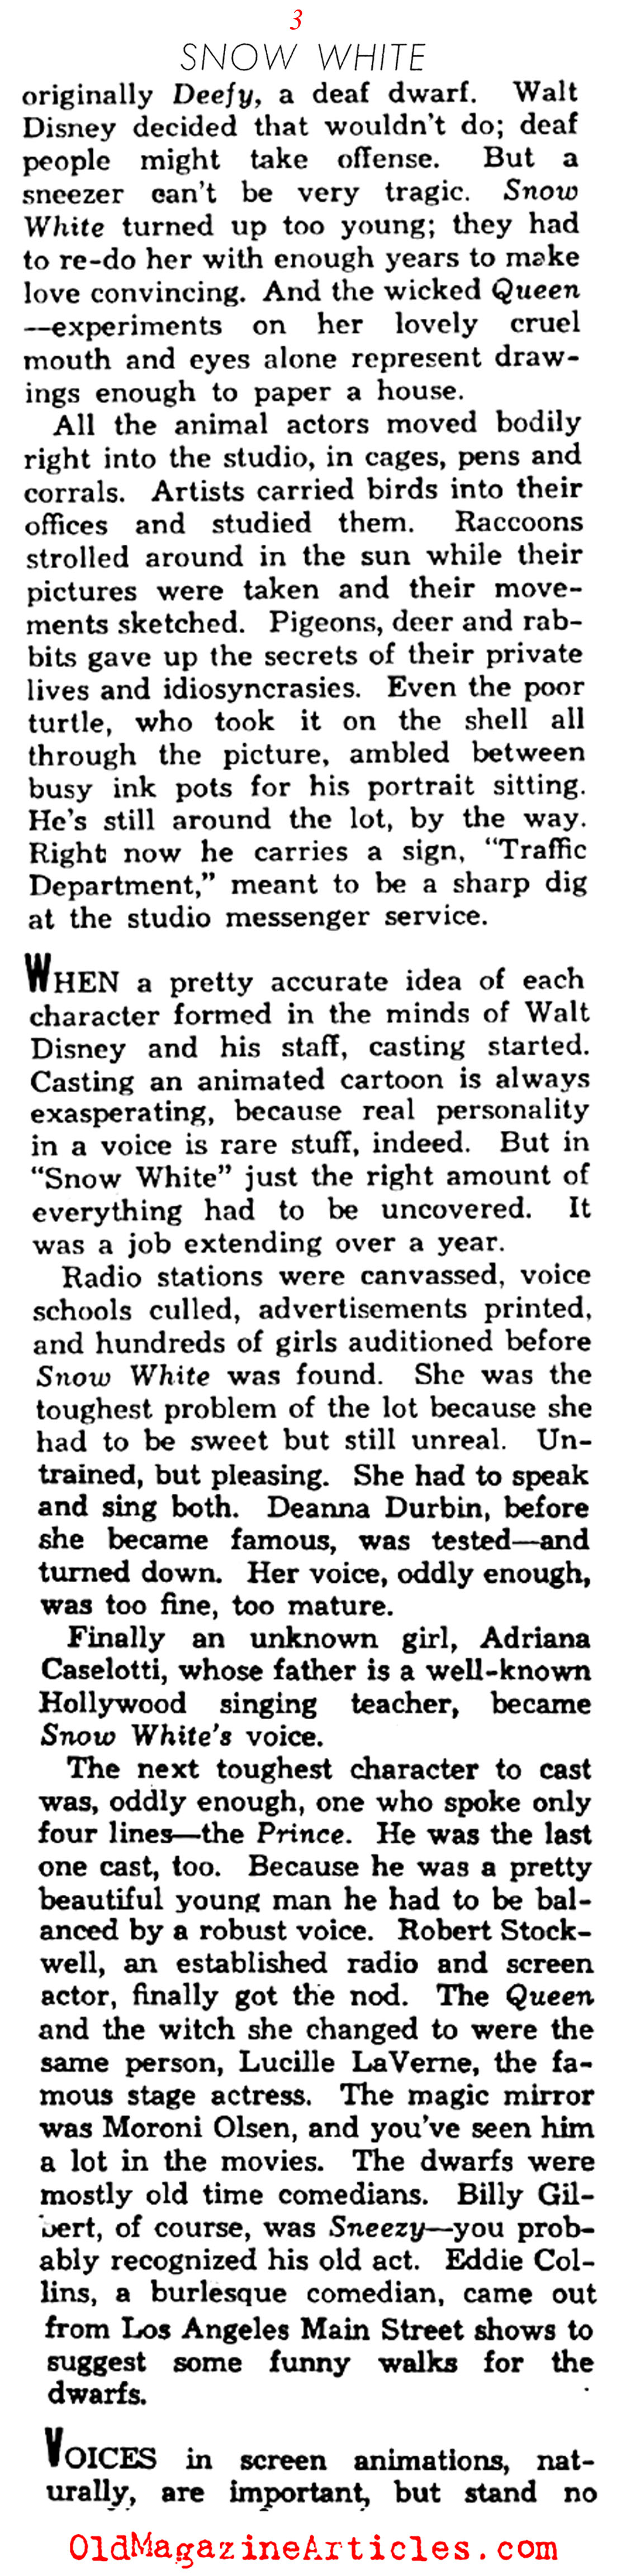 The Making of SNOW WHITE and the SEVEN DWARFS (Photoplay Magazine, 1938)